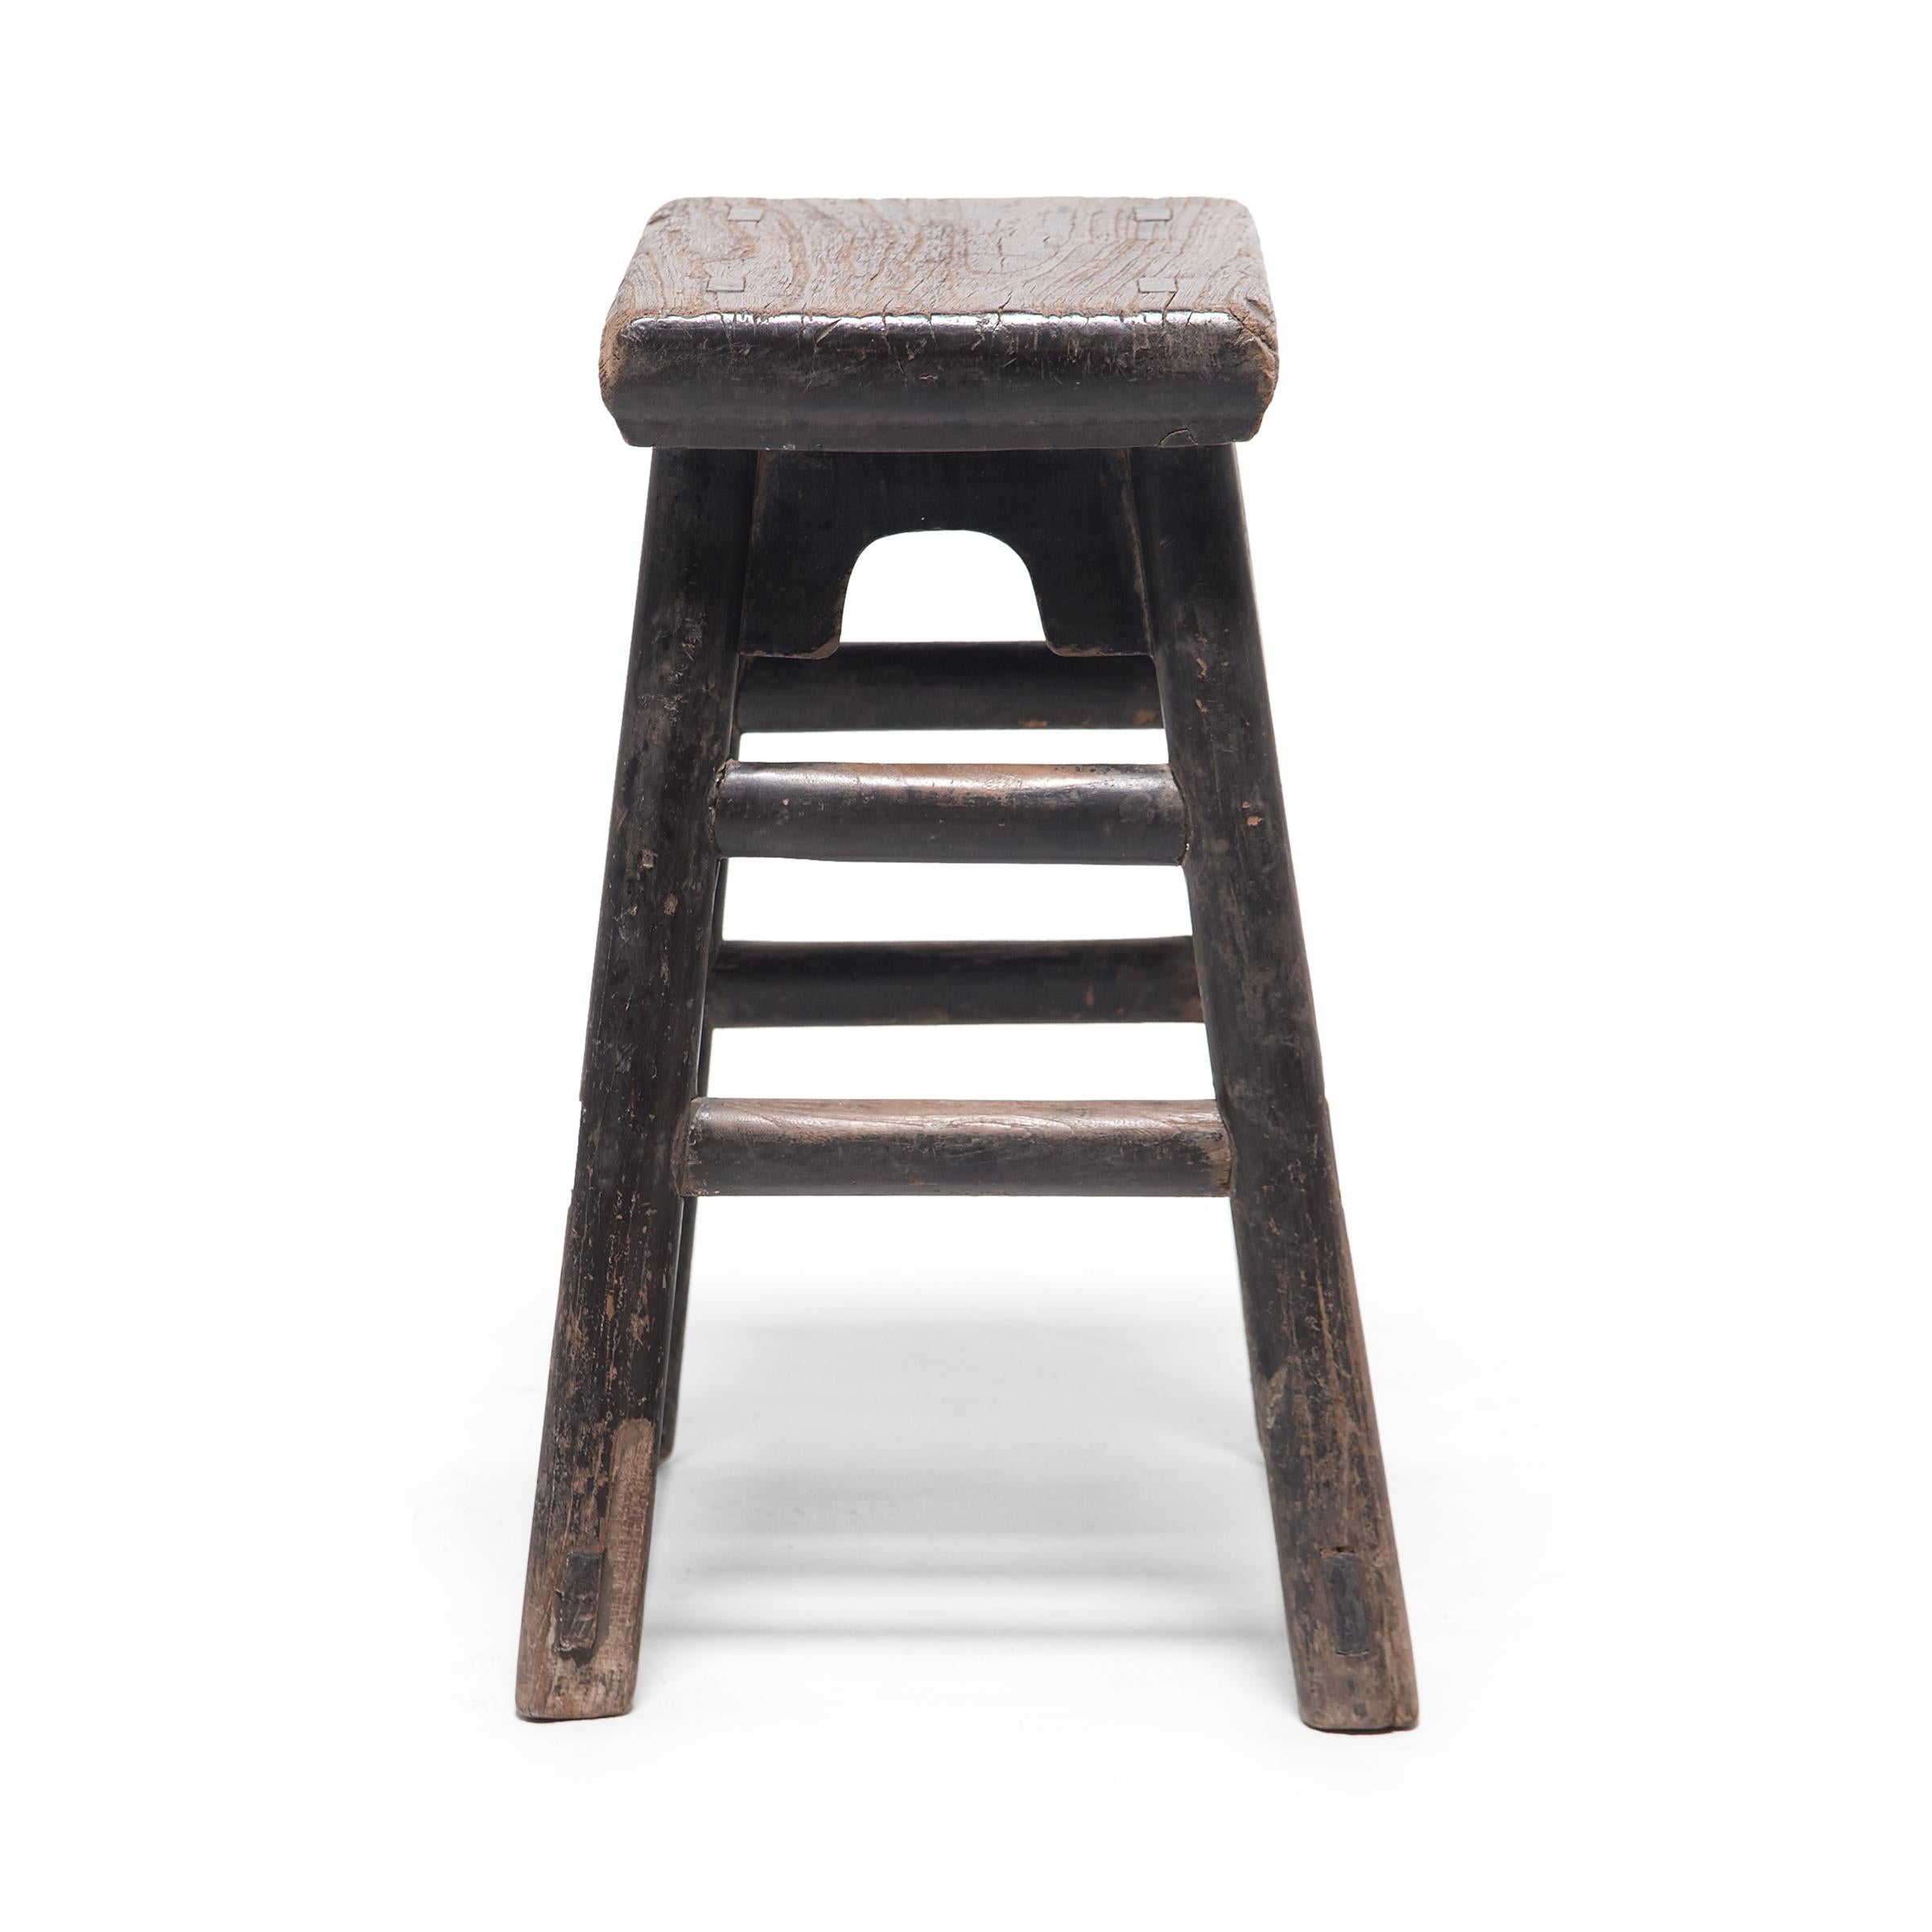 Rustic Provincial Chinese Time Out Stool, circa 1900